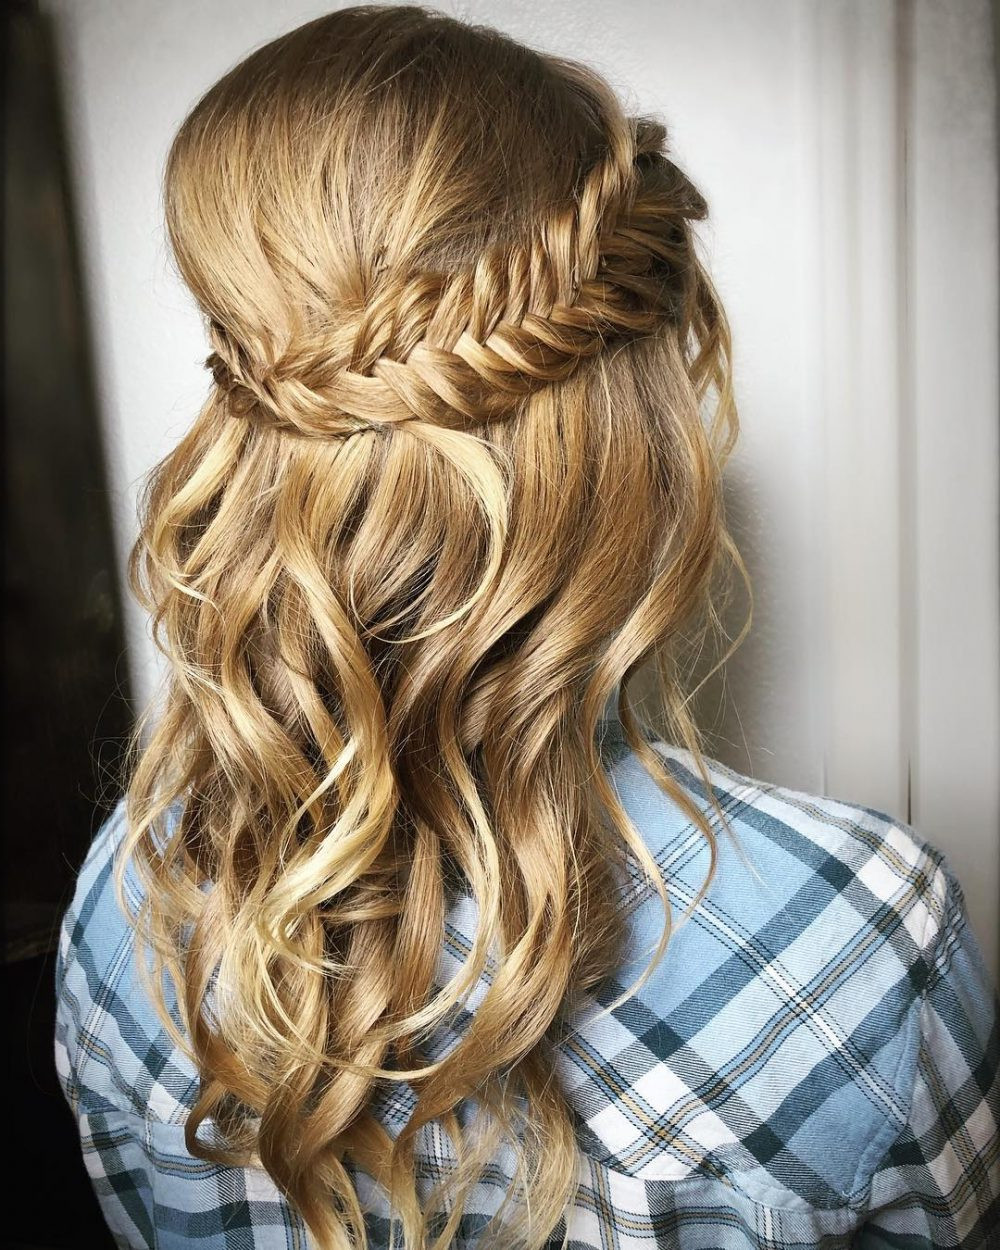 Prom Hairstyles With Headband
 2019 Latest Half Prom Updos With Bangs And Braided Headband